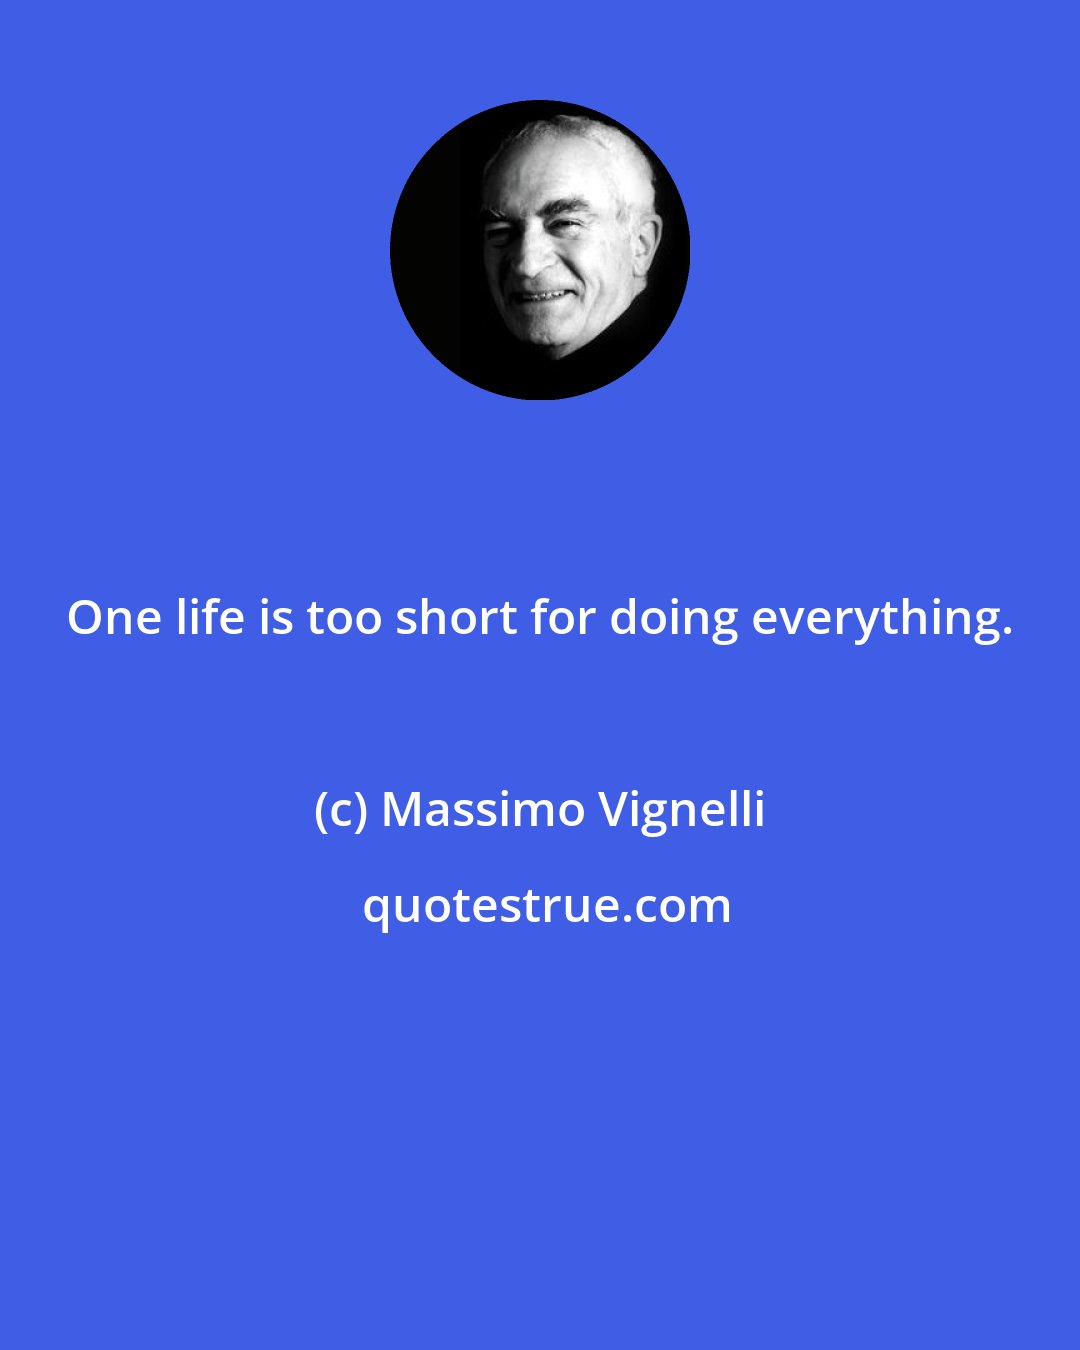 Massimo Vignelli: One life is too short for doing everything.